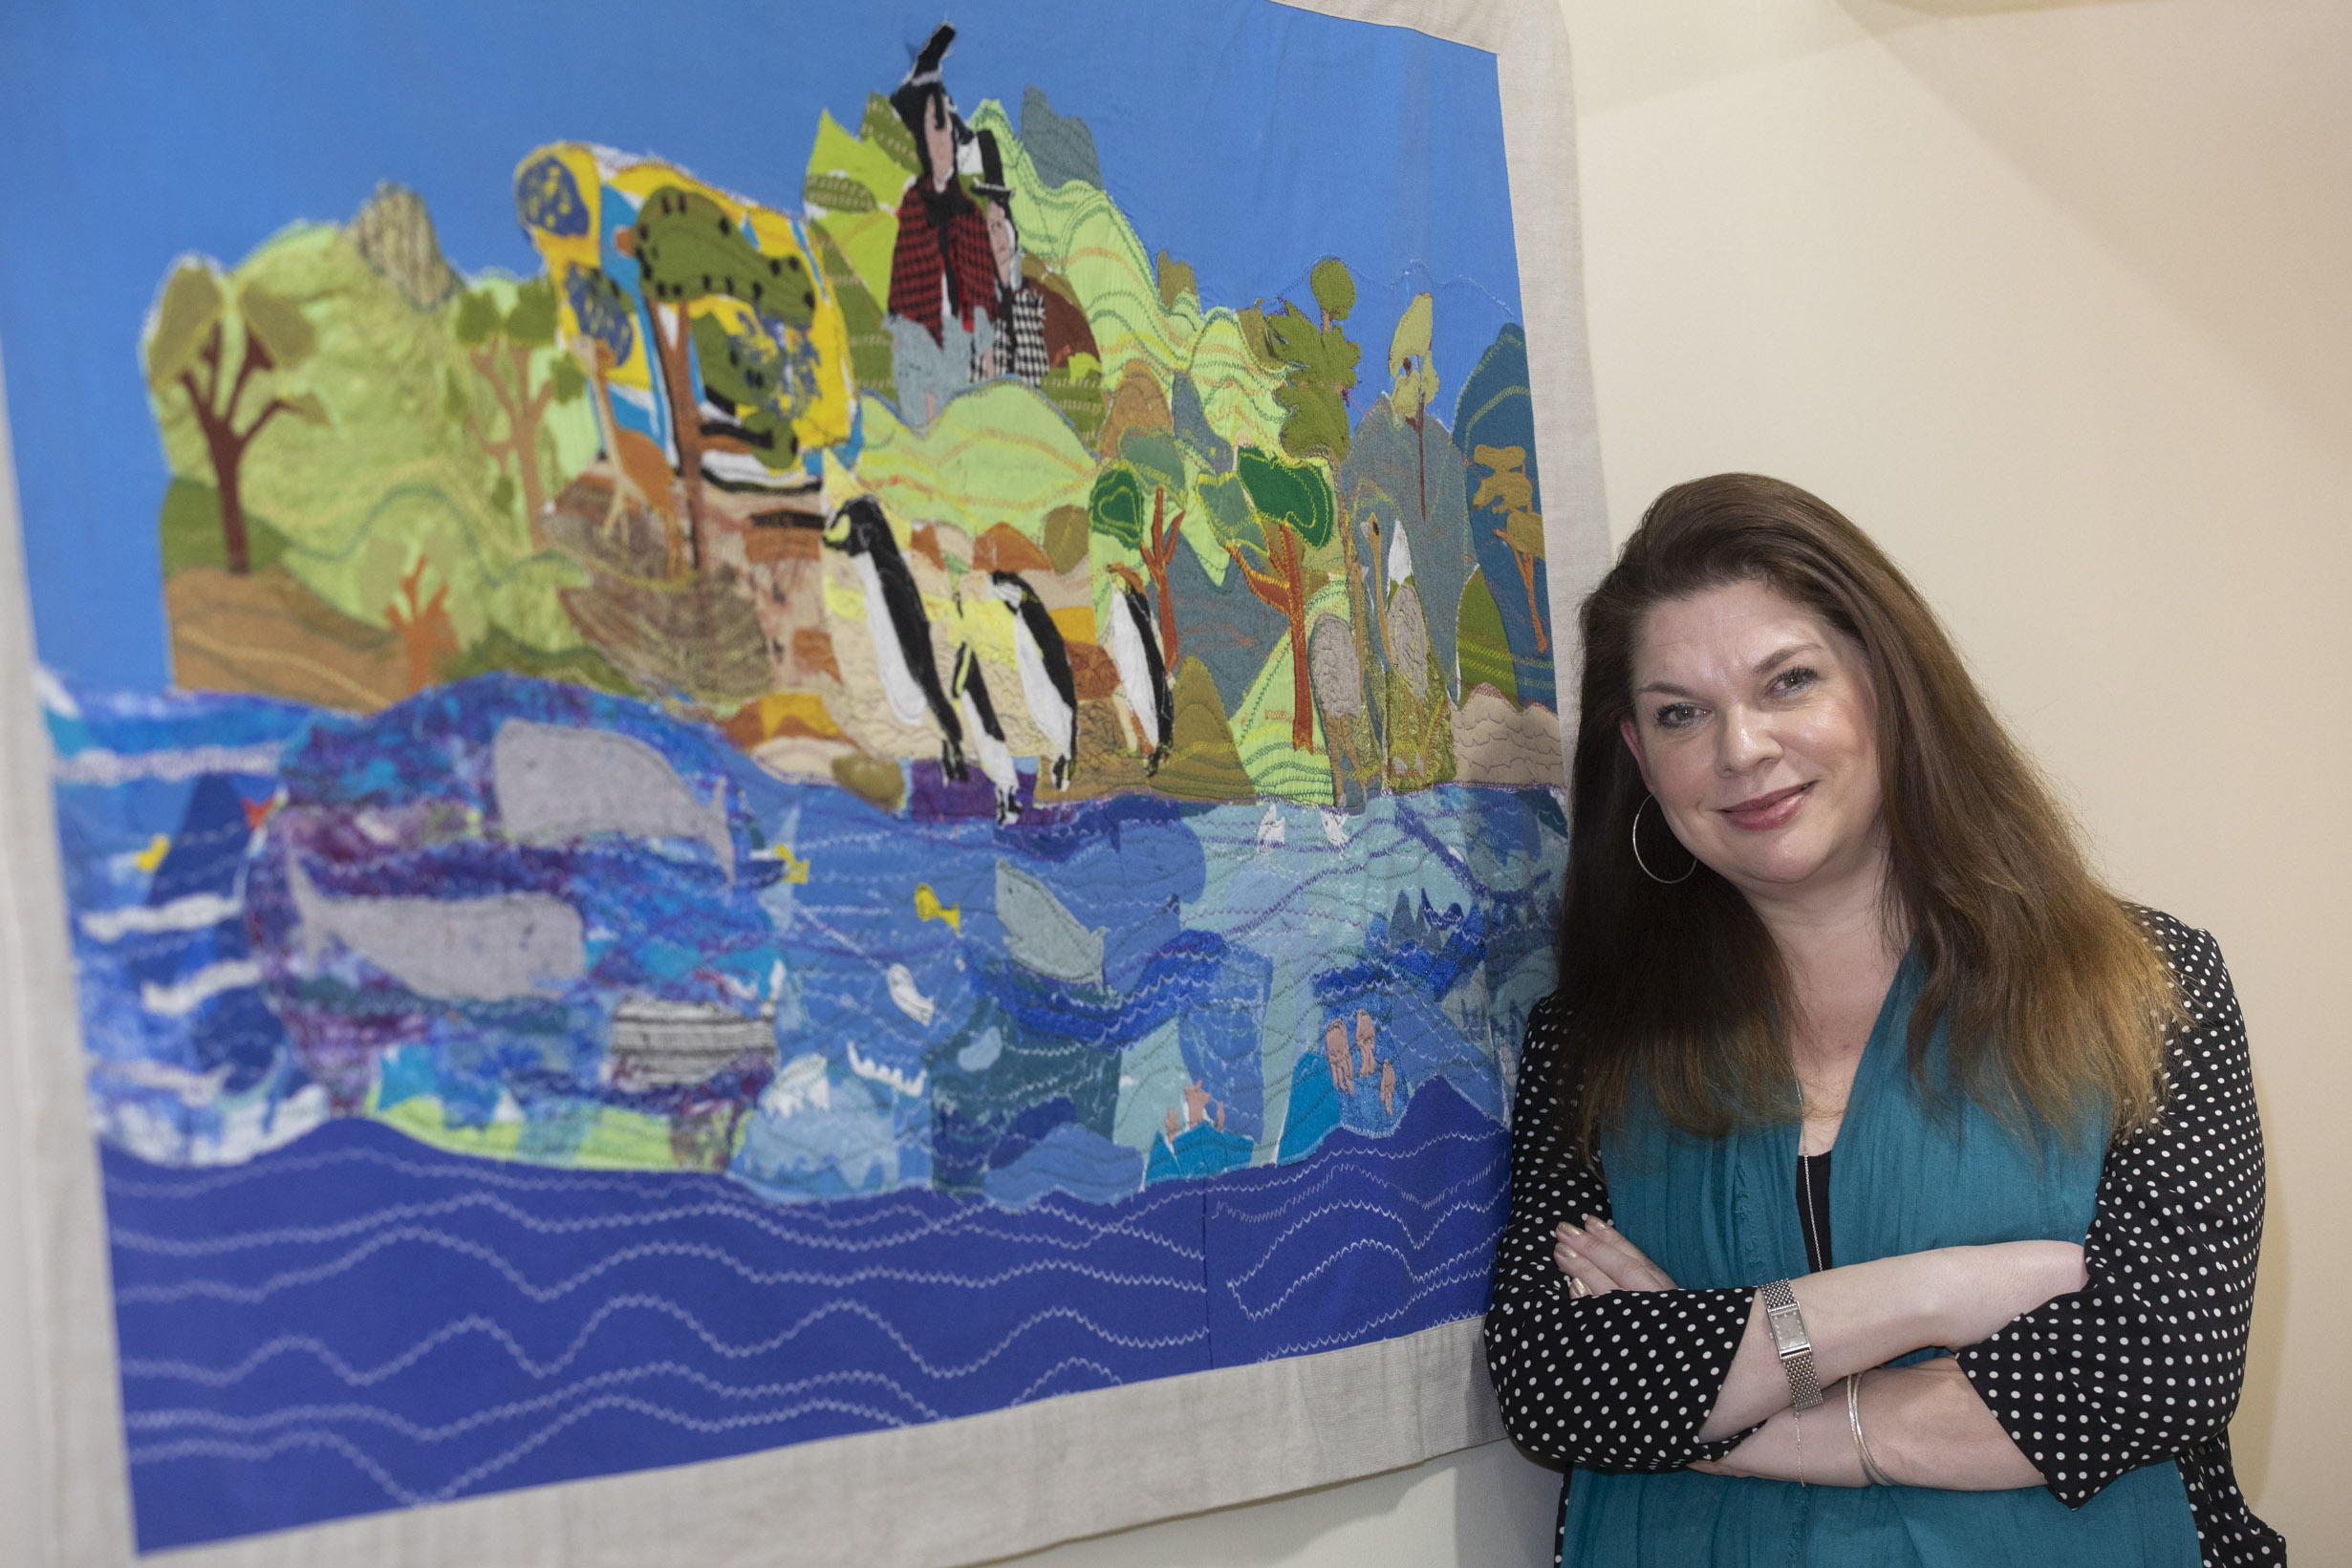 Pioneering artist Sarah still drawn to care after 25 years